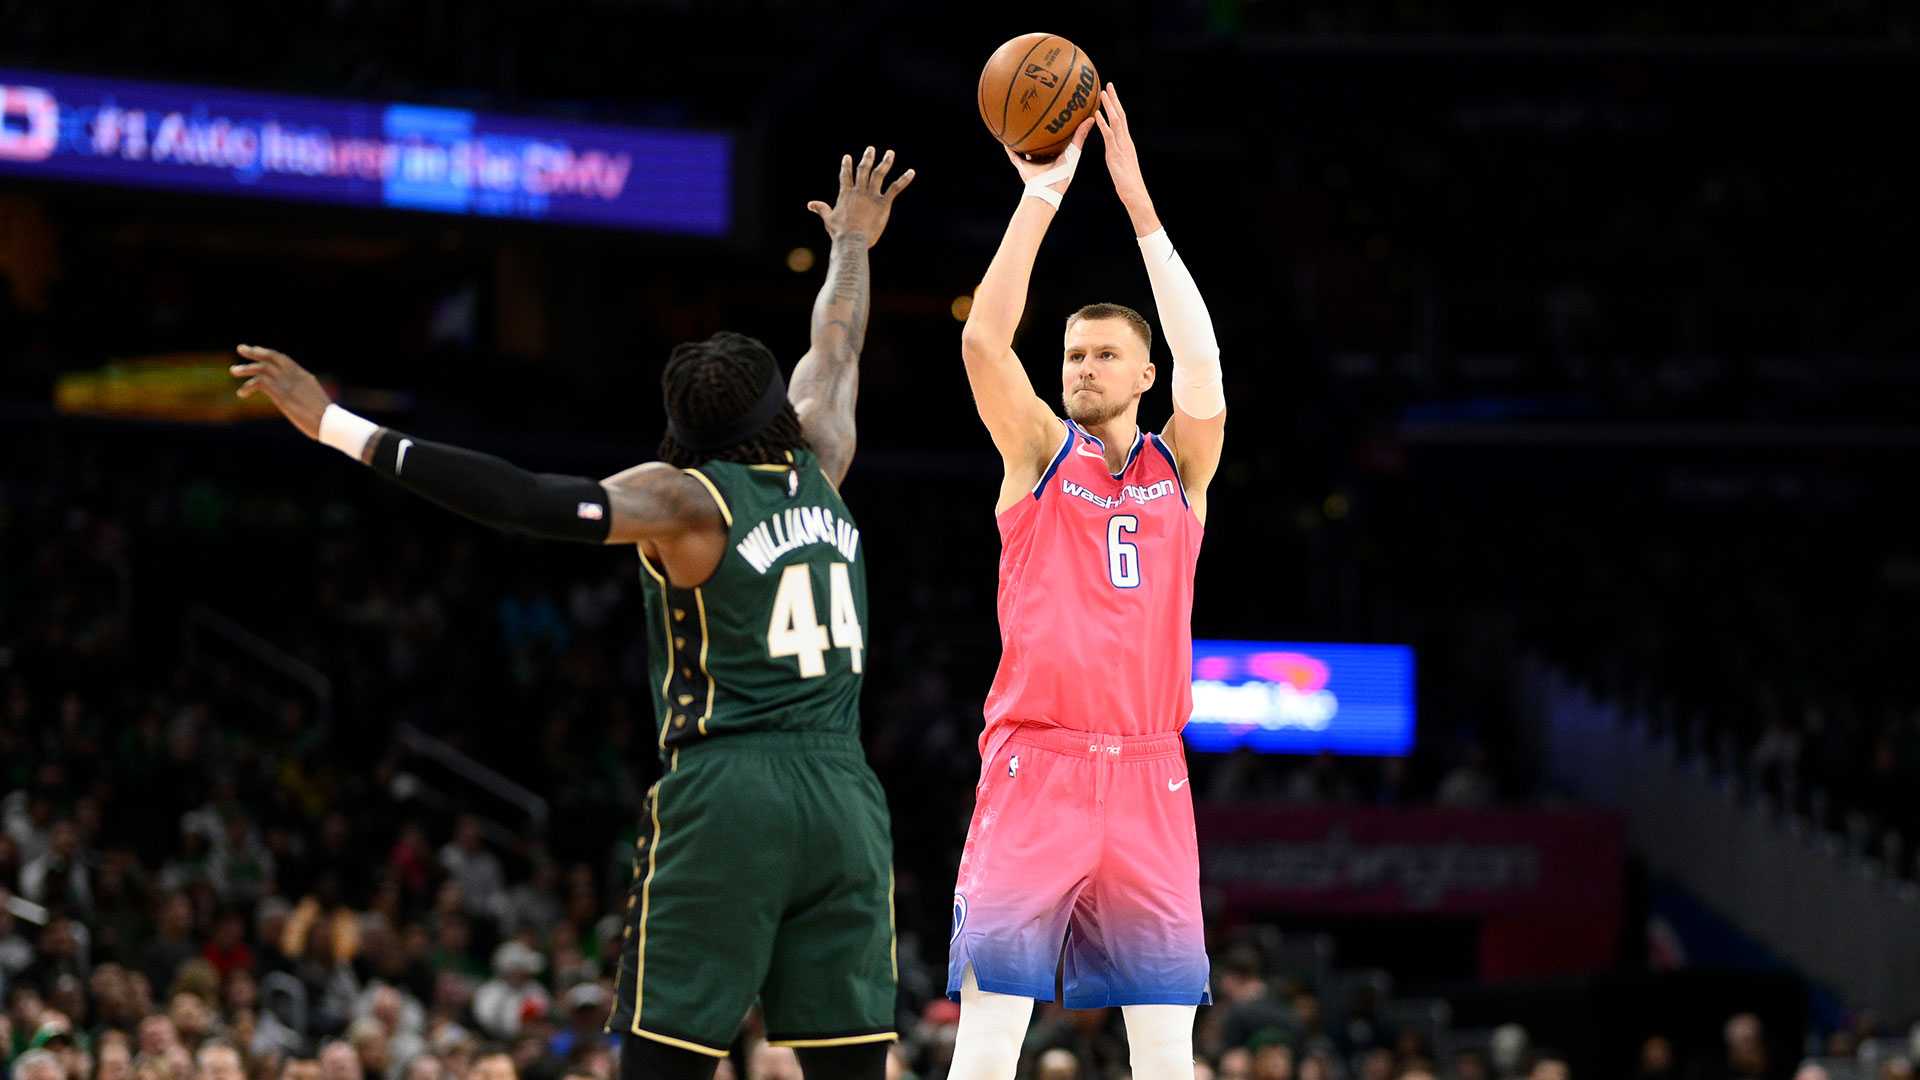 Kristaps Porzingis has been named a 2018 NBA All-Star reserve